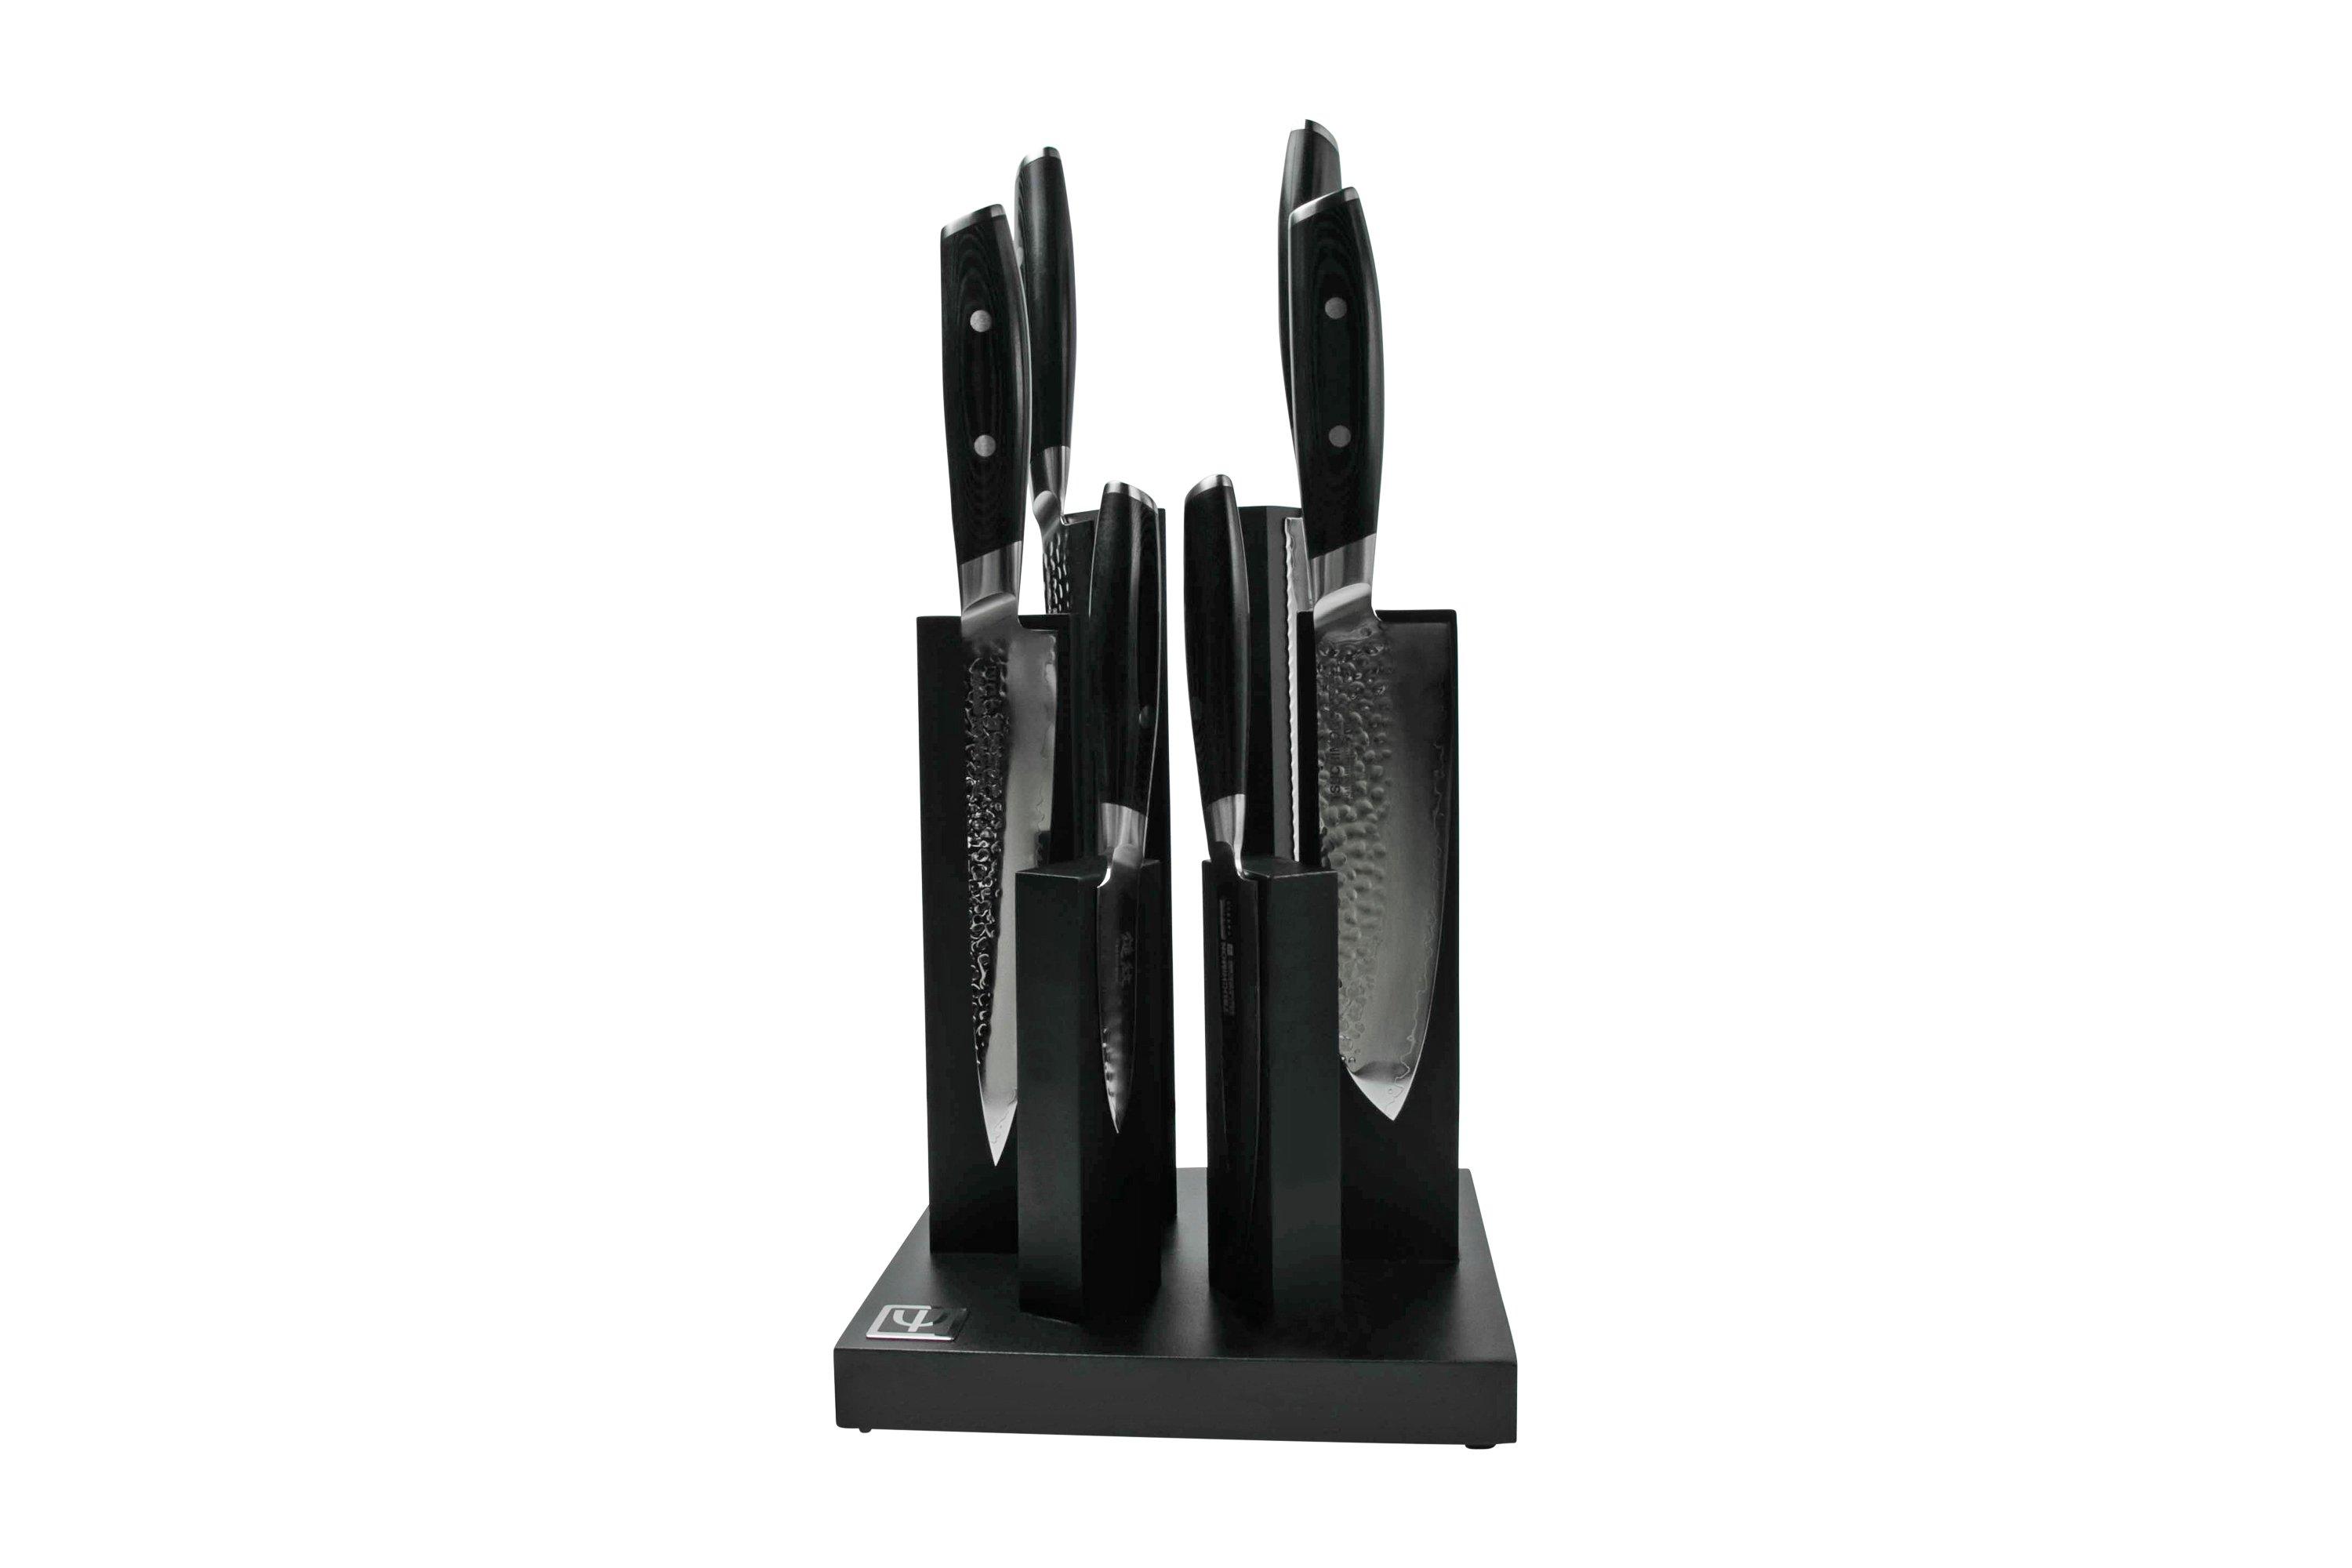 Yaxell Tower 39070 magnetic knife block for 6 knives, black